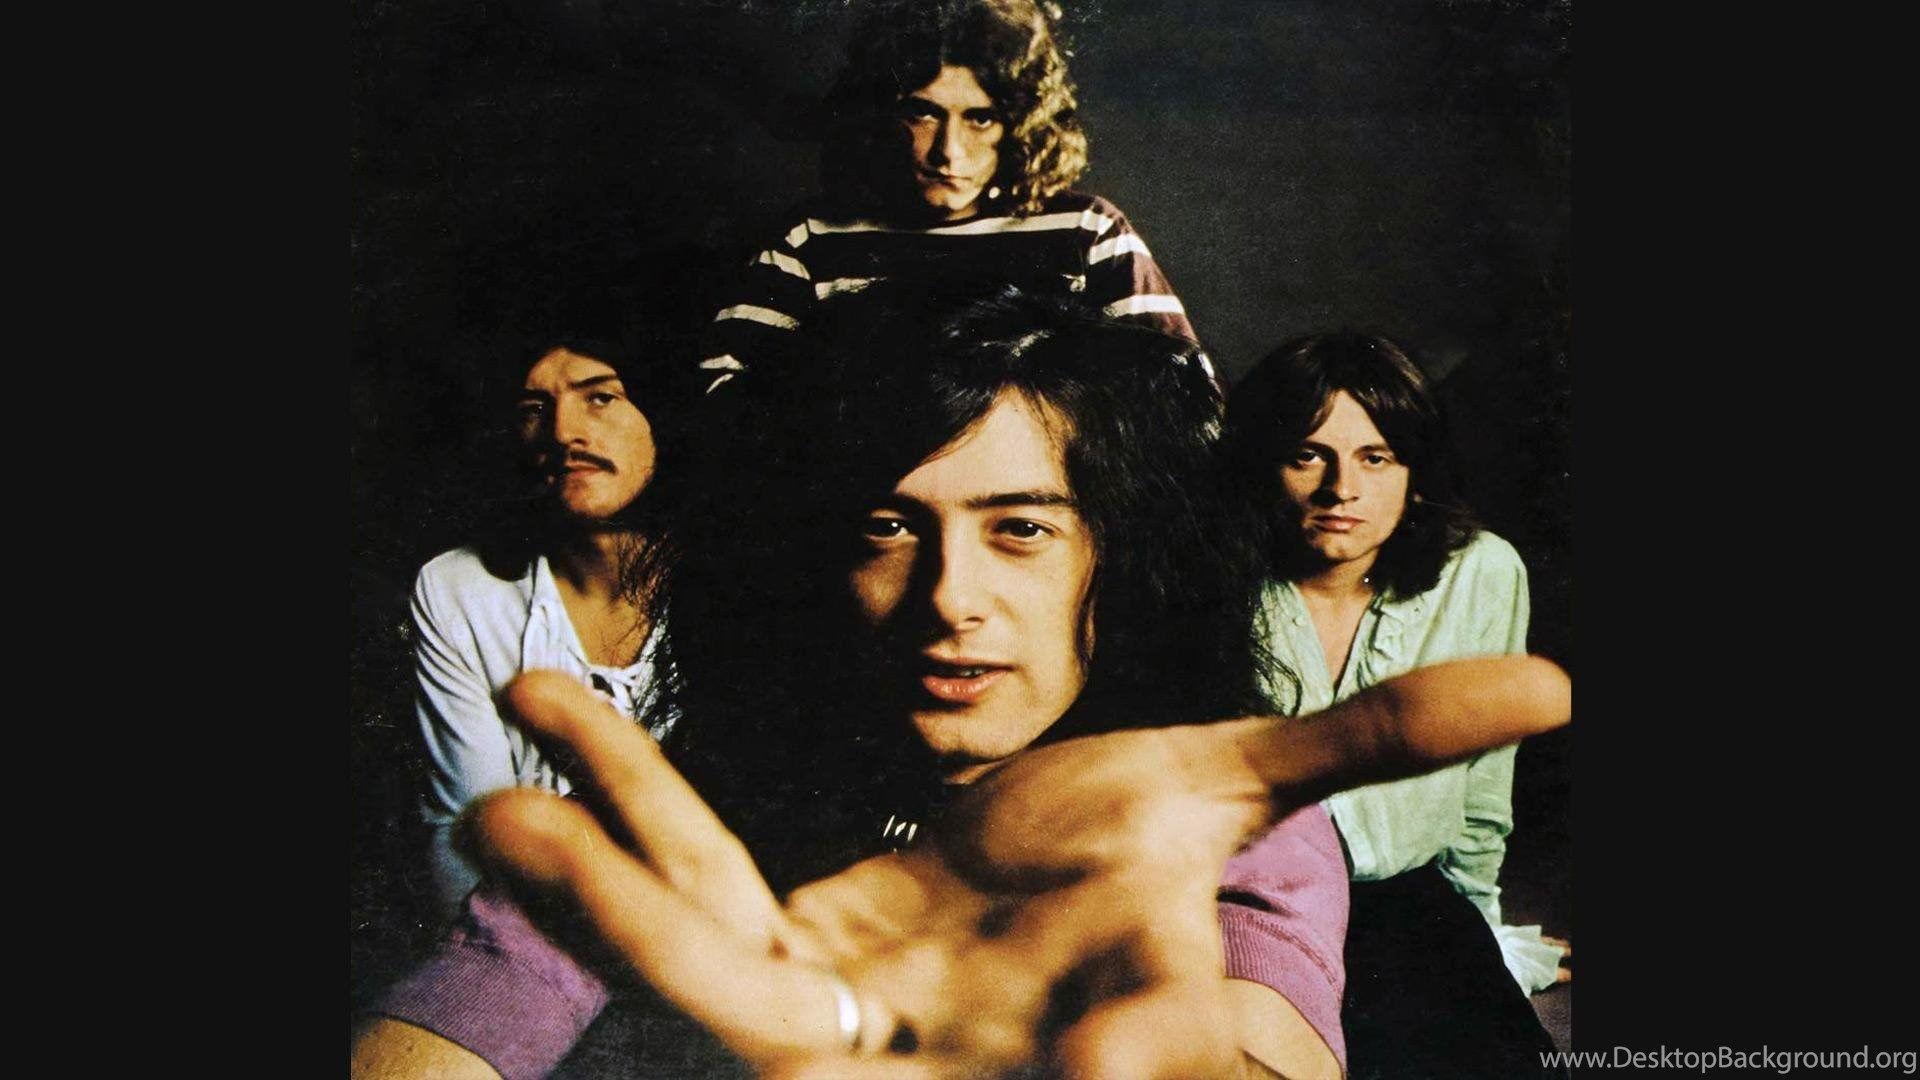 Classic led zeppelin wallpaper with jimmy page in Desktop